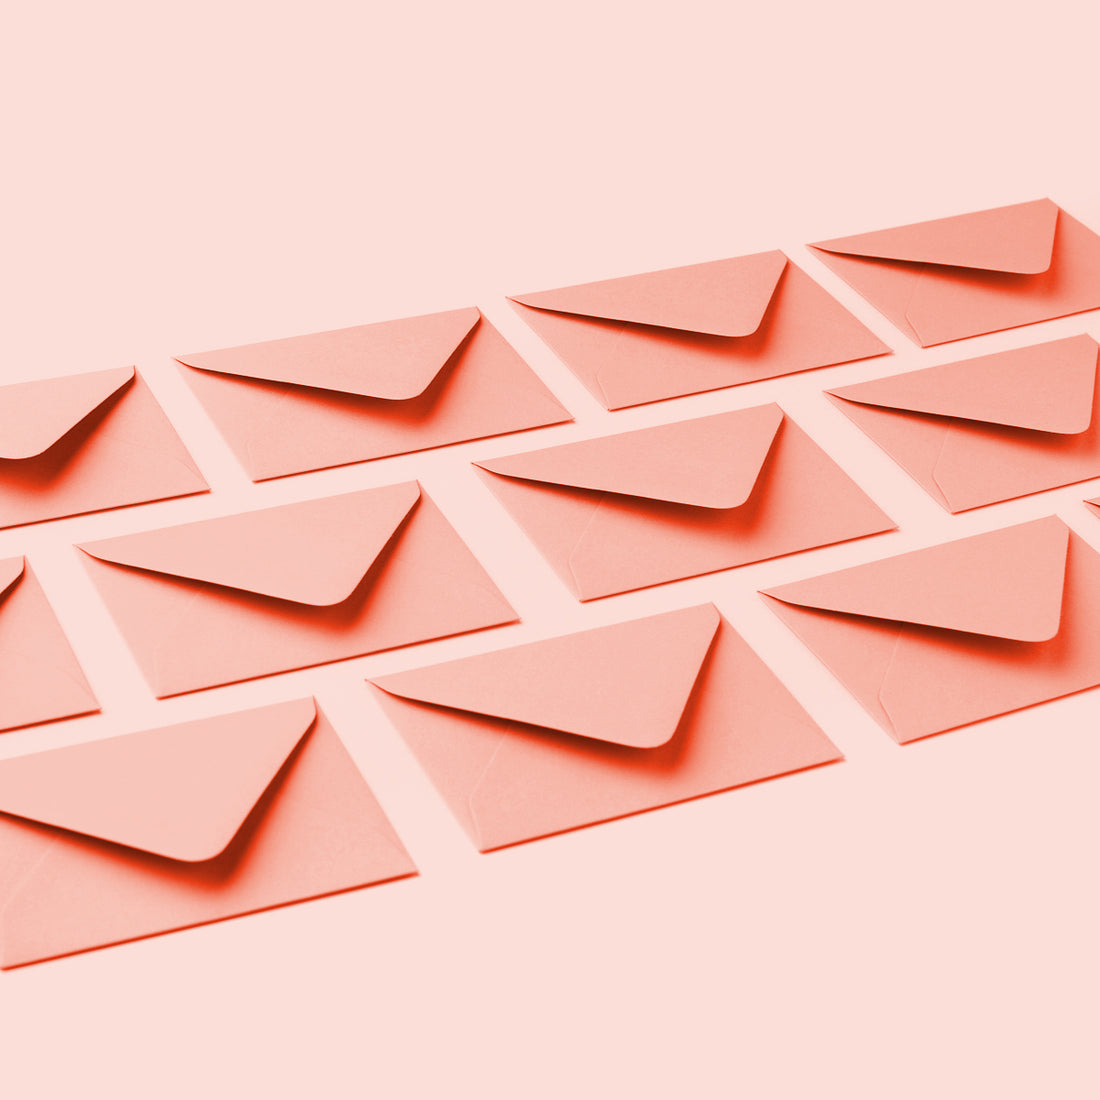 How To Start An Email Empire In 2022